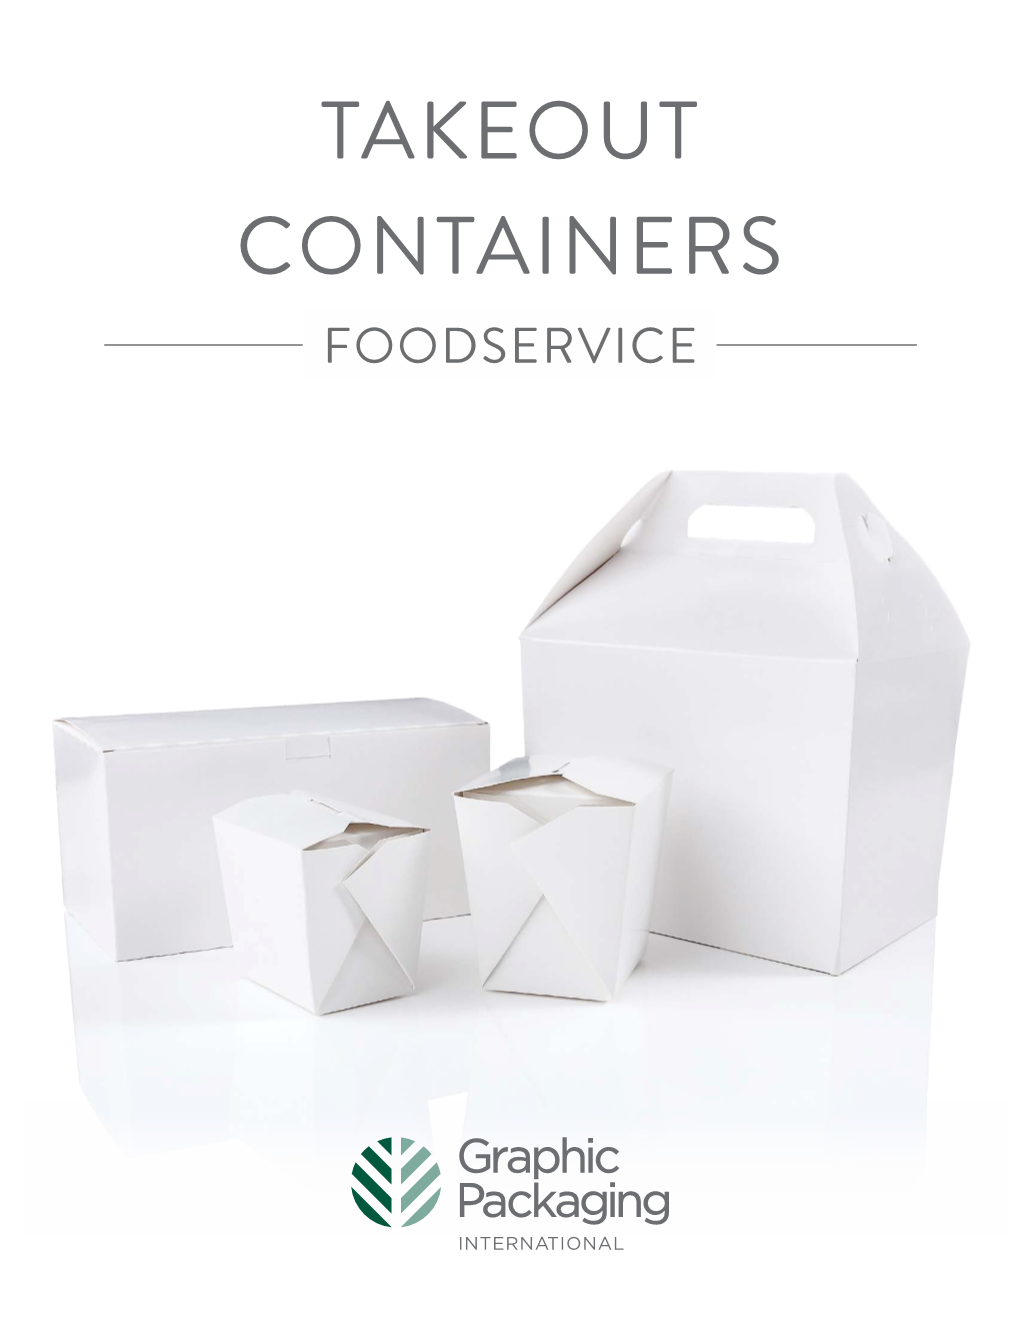 TAKEOUT CONTAINERS FOODSERVICE Our Fast Food and Deli Takeout Containers Provide the Convenience, Protection and Presentation Your Customers Expect